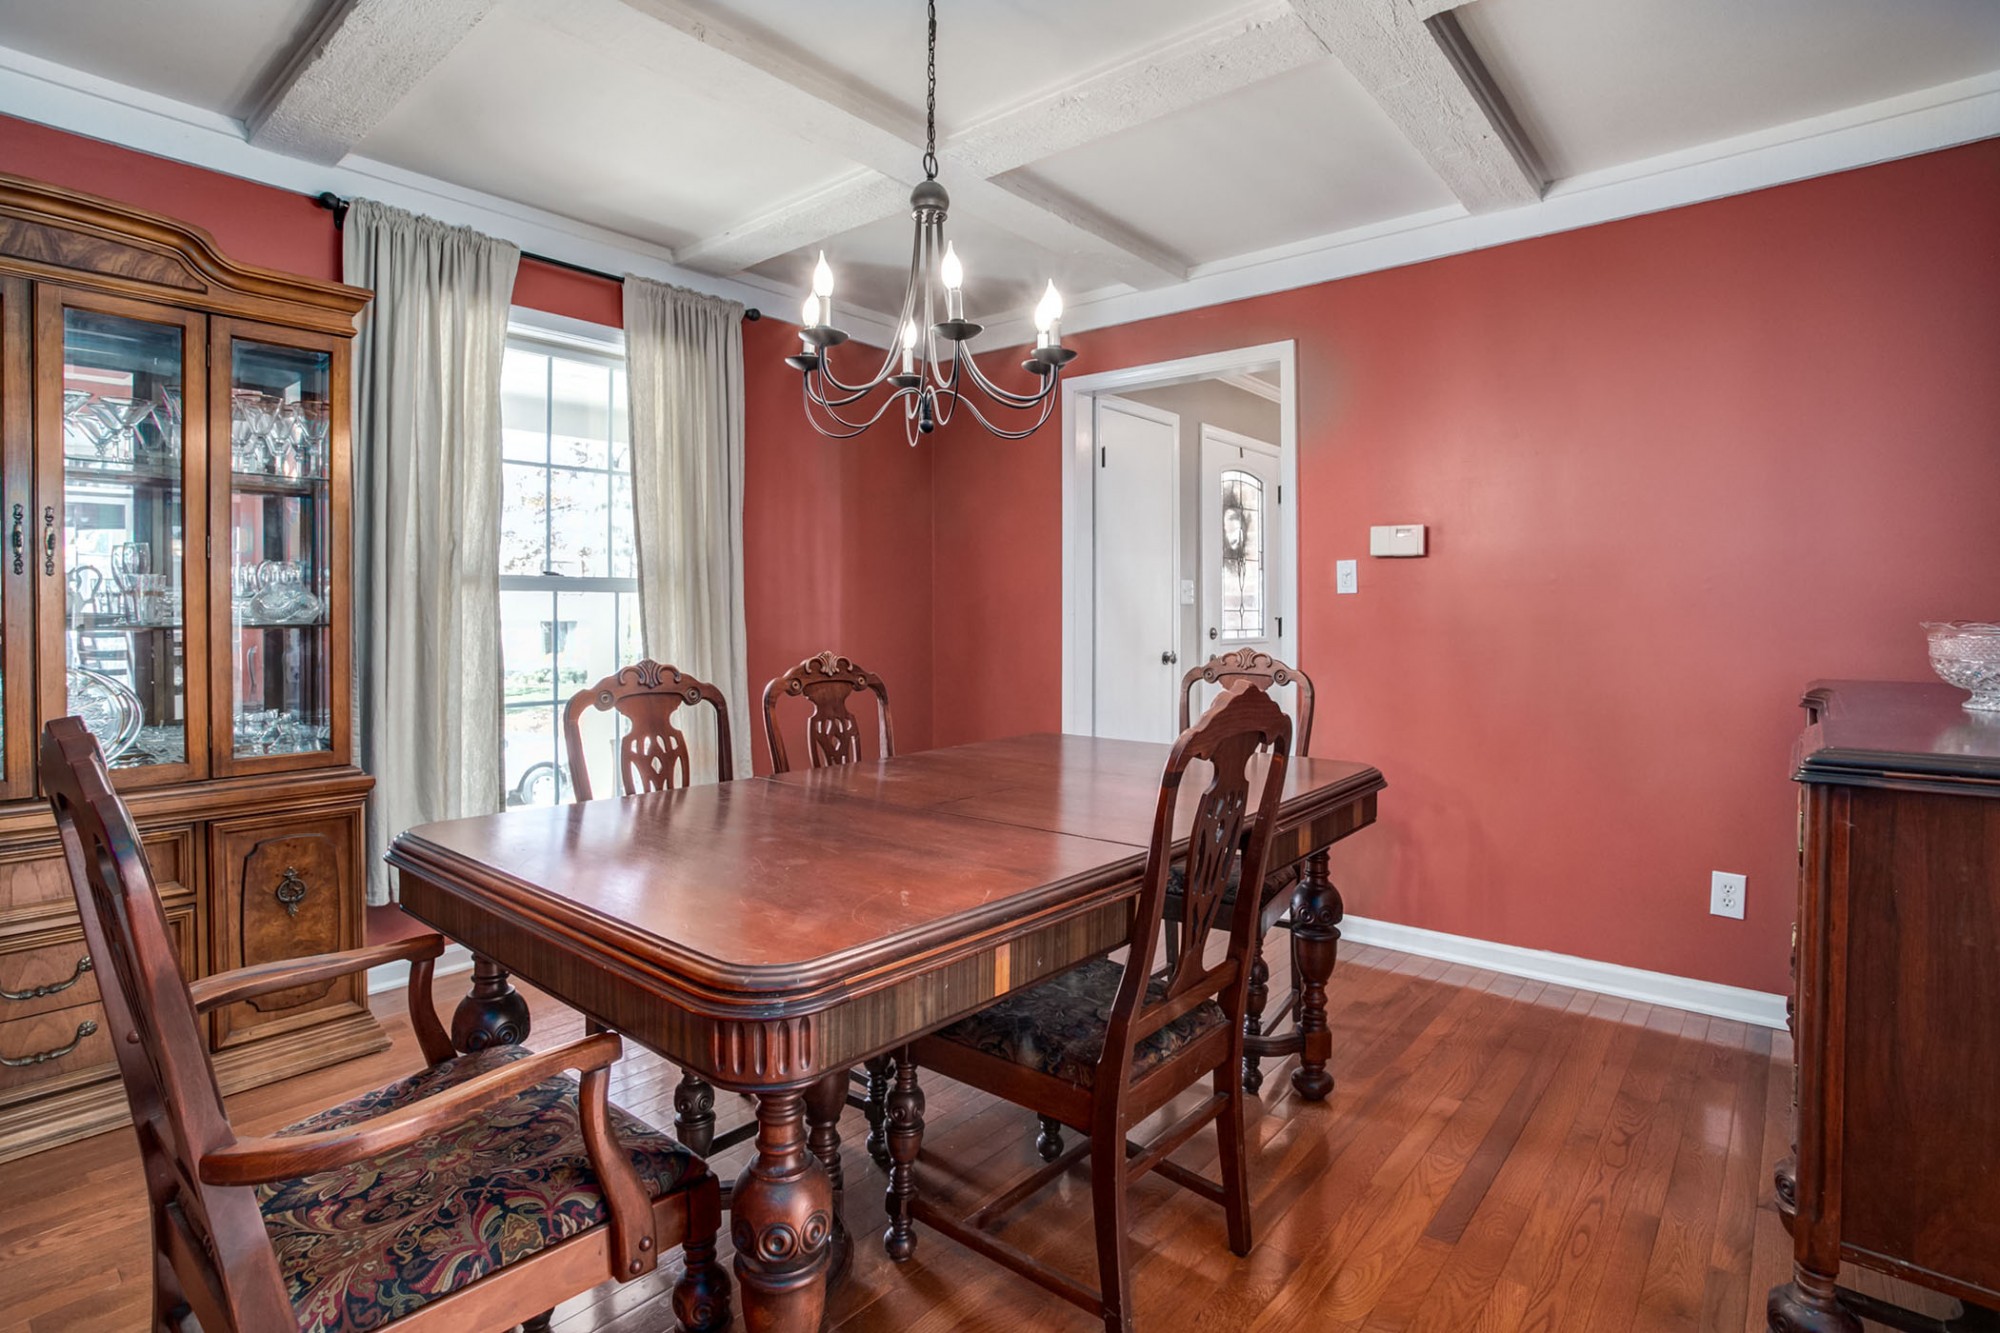 To the right of the foyer, the beautiful hardwood floors continue to the formal dining room.